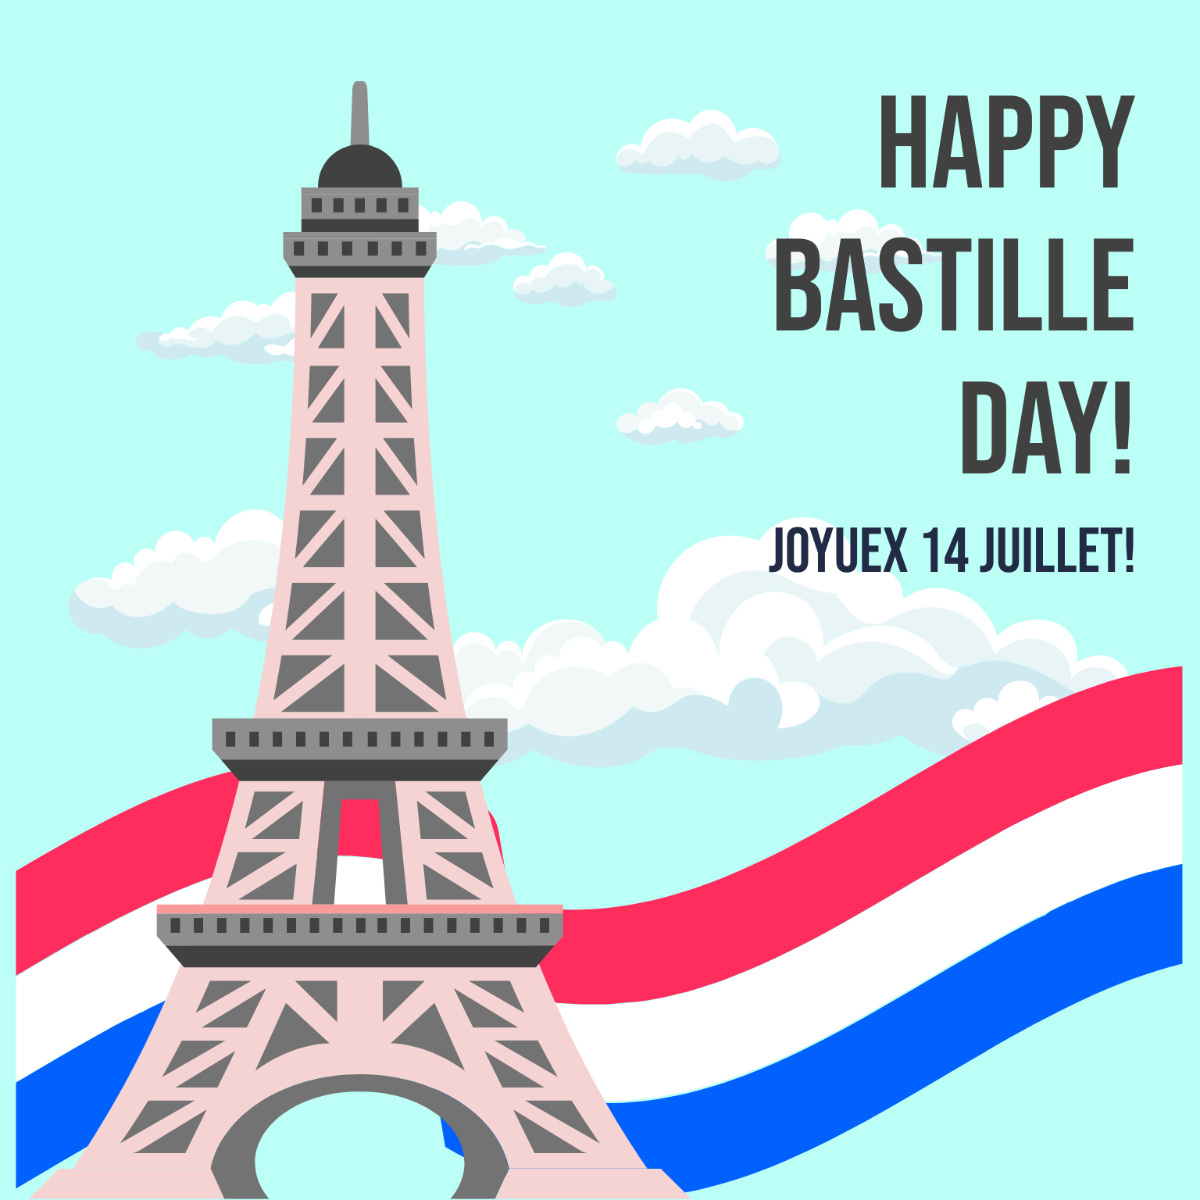 Free Bastille Day Wishes Vector Template